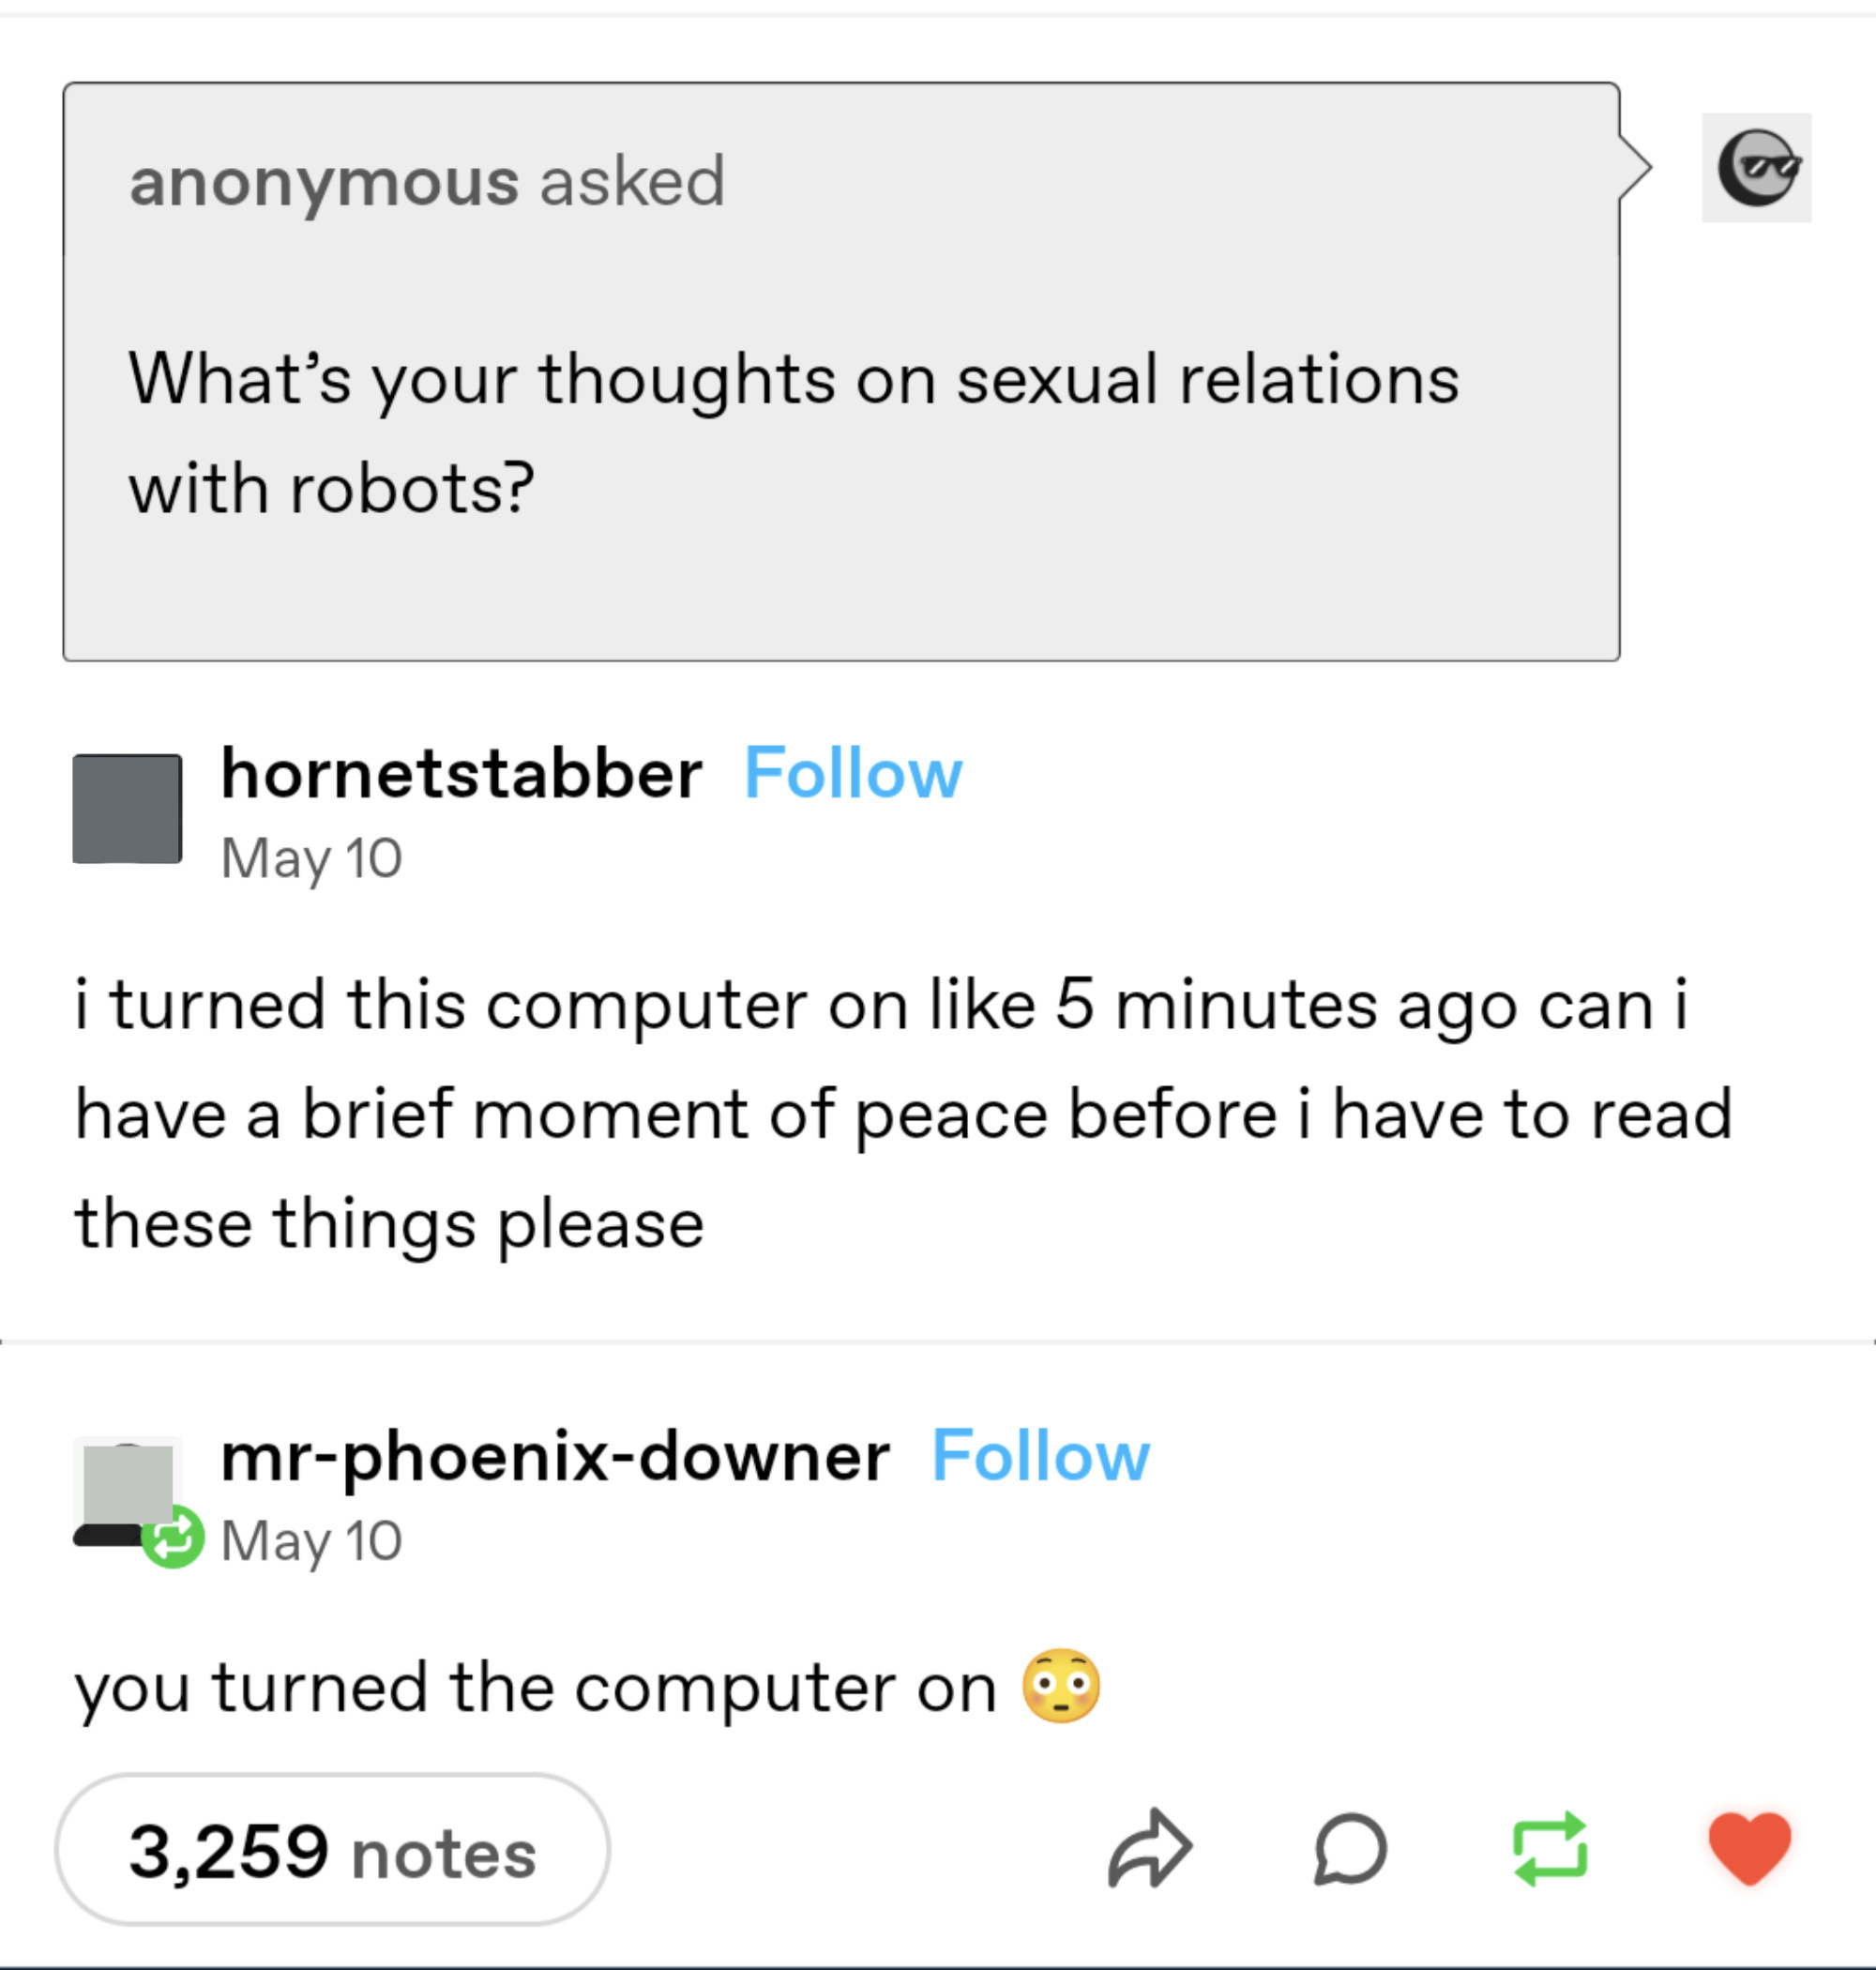 &quot;Anonymous&quot; asks &quot;What are your thoughts on sex with robots?&quot; And when person says &quot;I turned this computer on like 5 minutes ago, can I have a brief moment of peace before I have to read these things,&quot; response is &quot;You turned the computer on&quot;